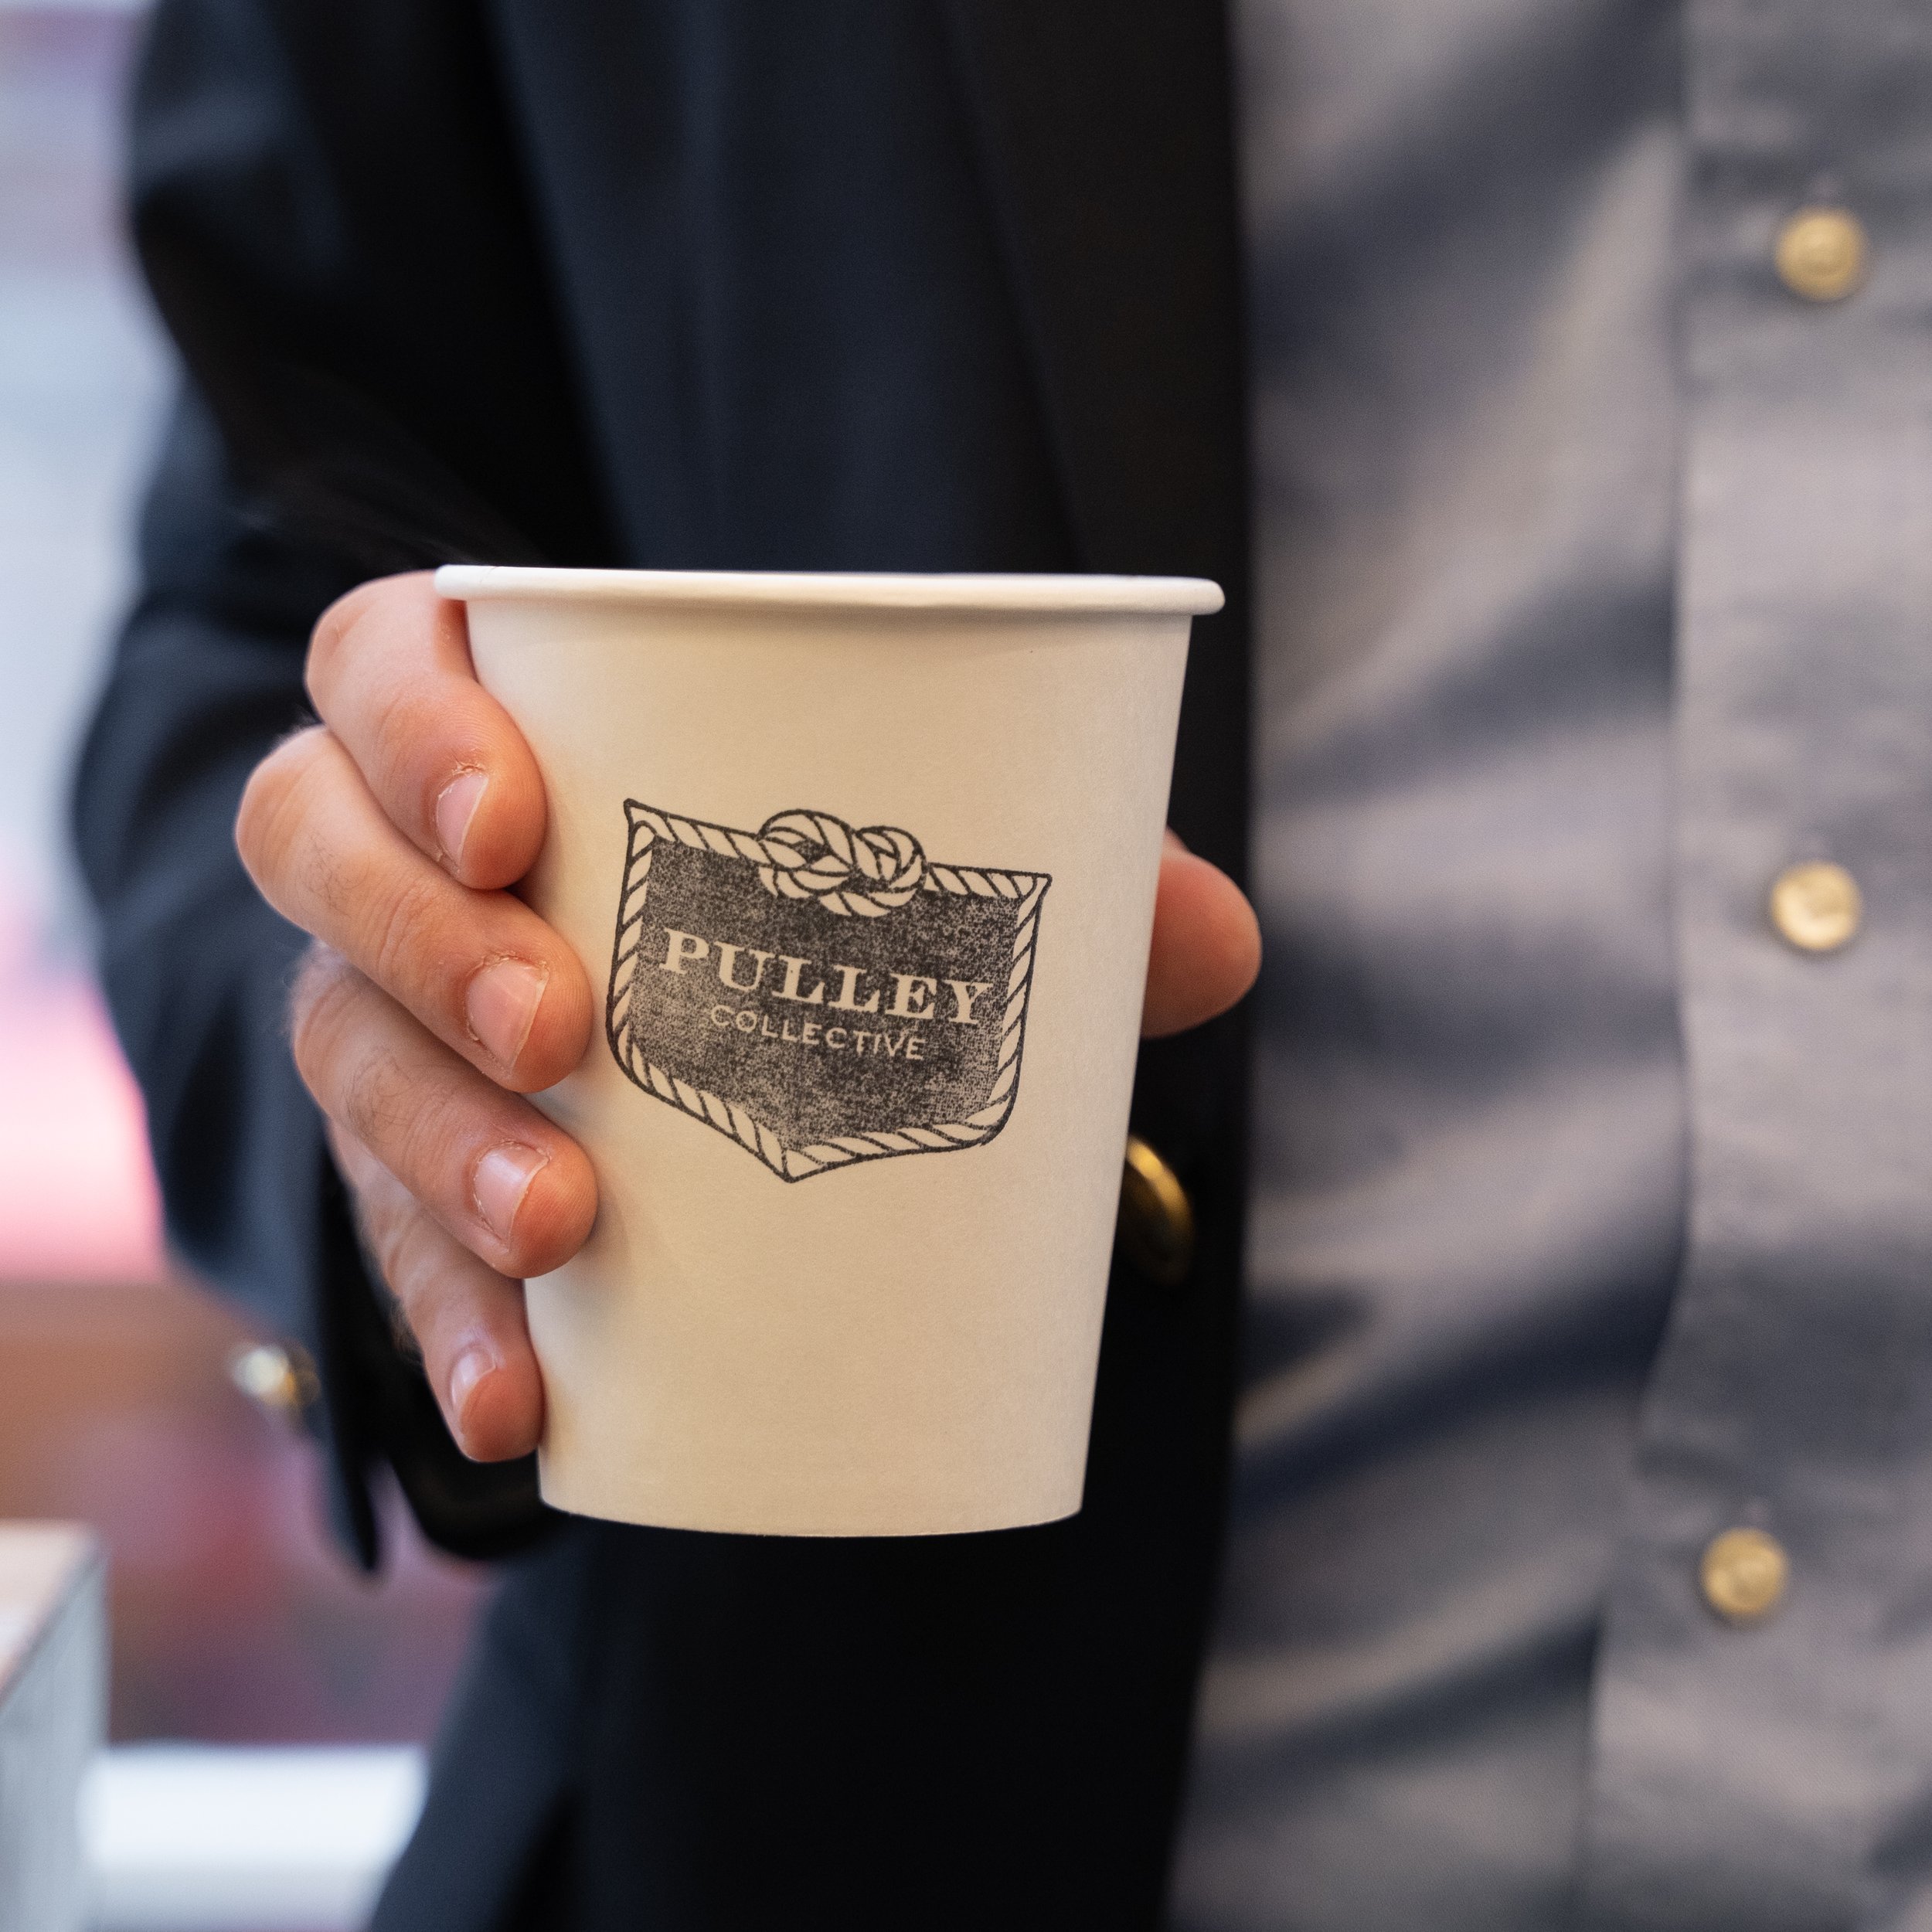 paper coffee cup with pulley collective brand held in a hand